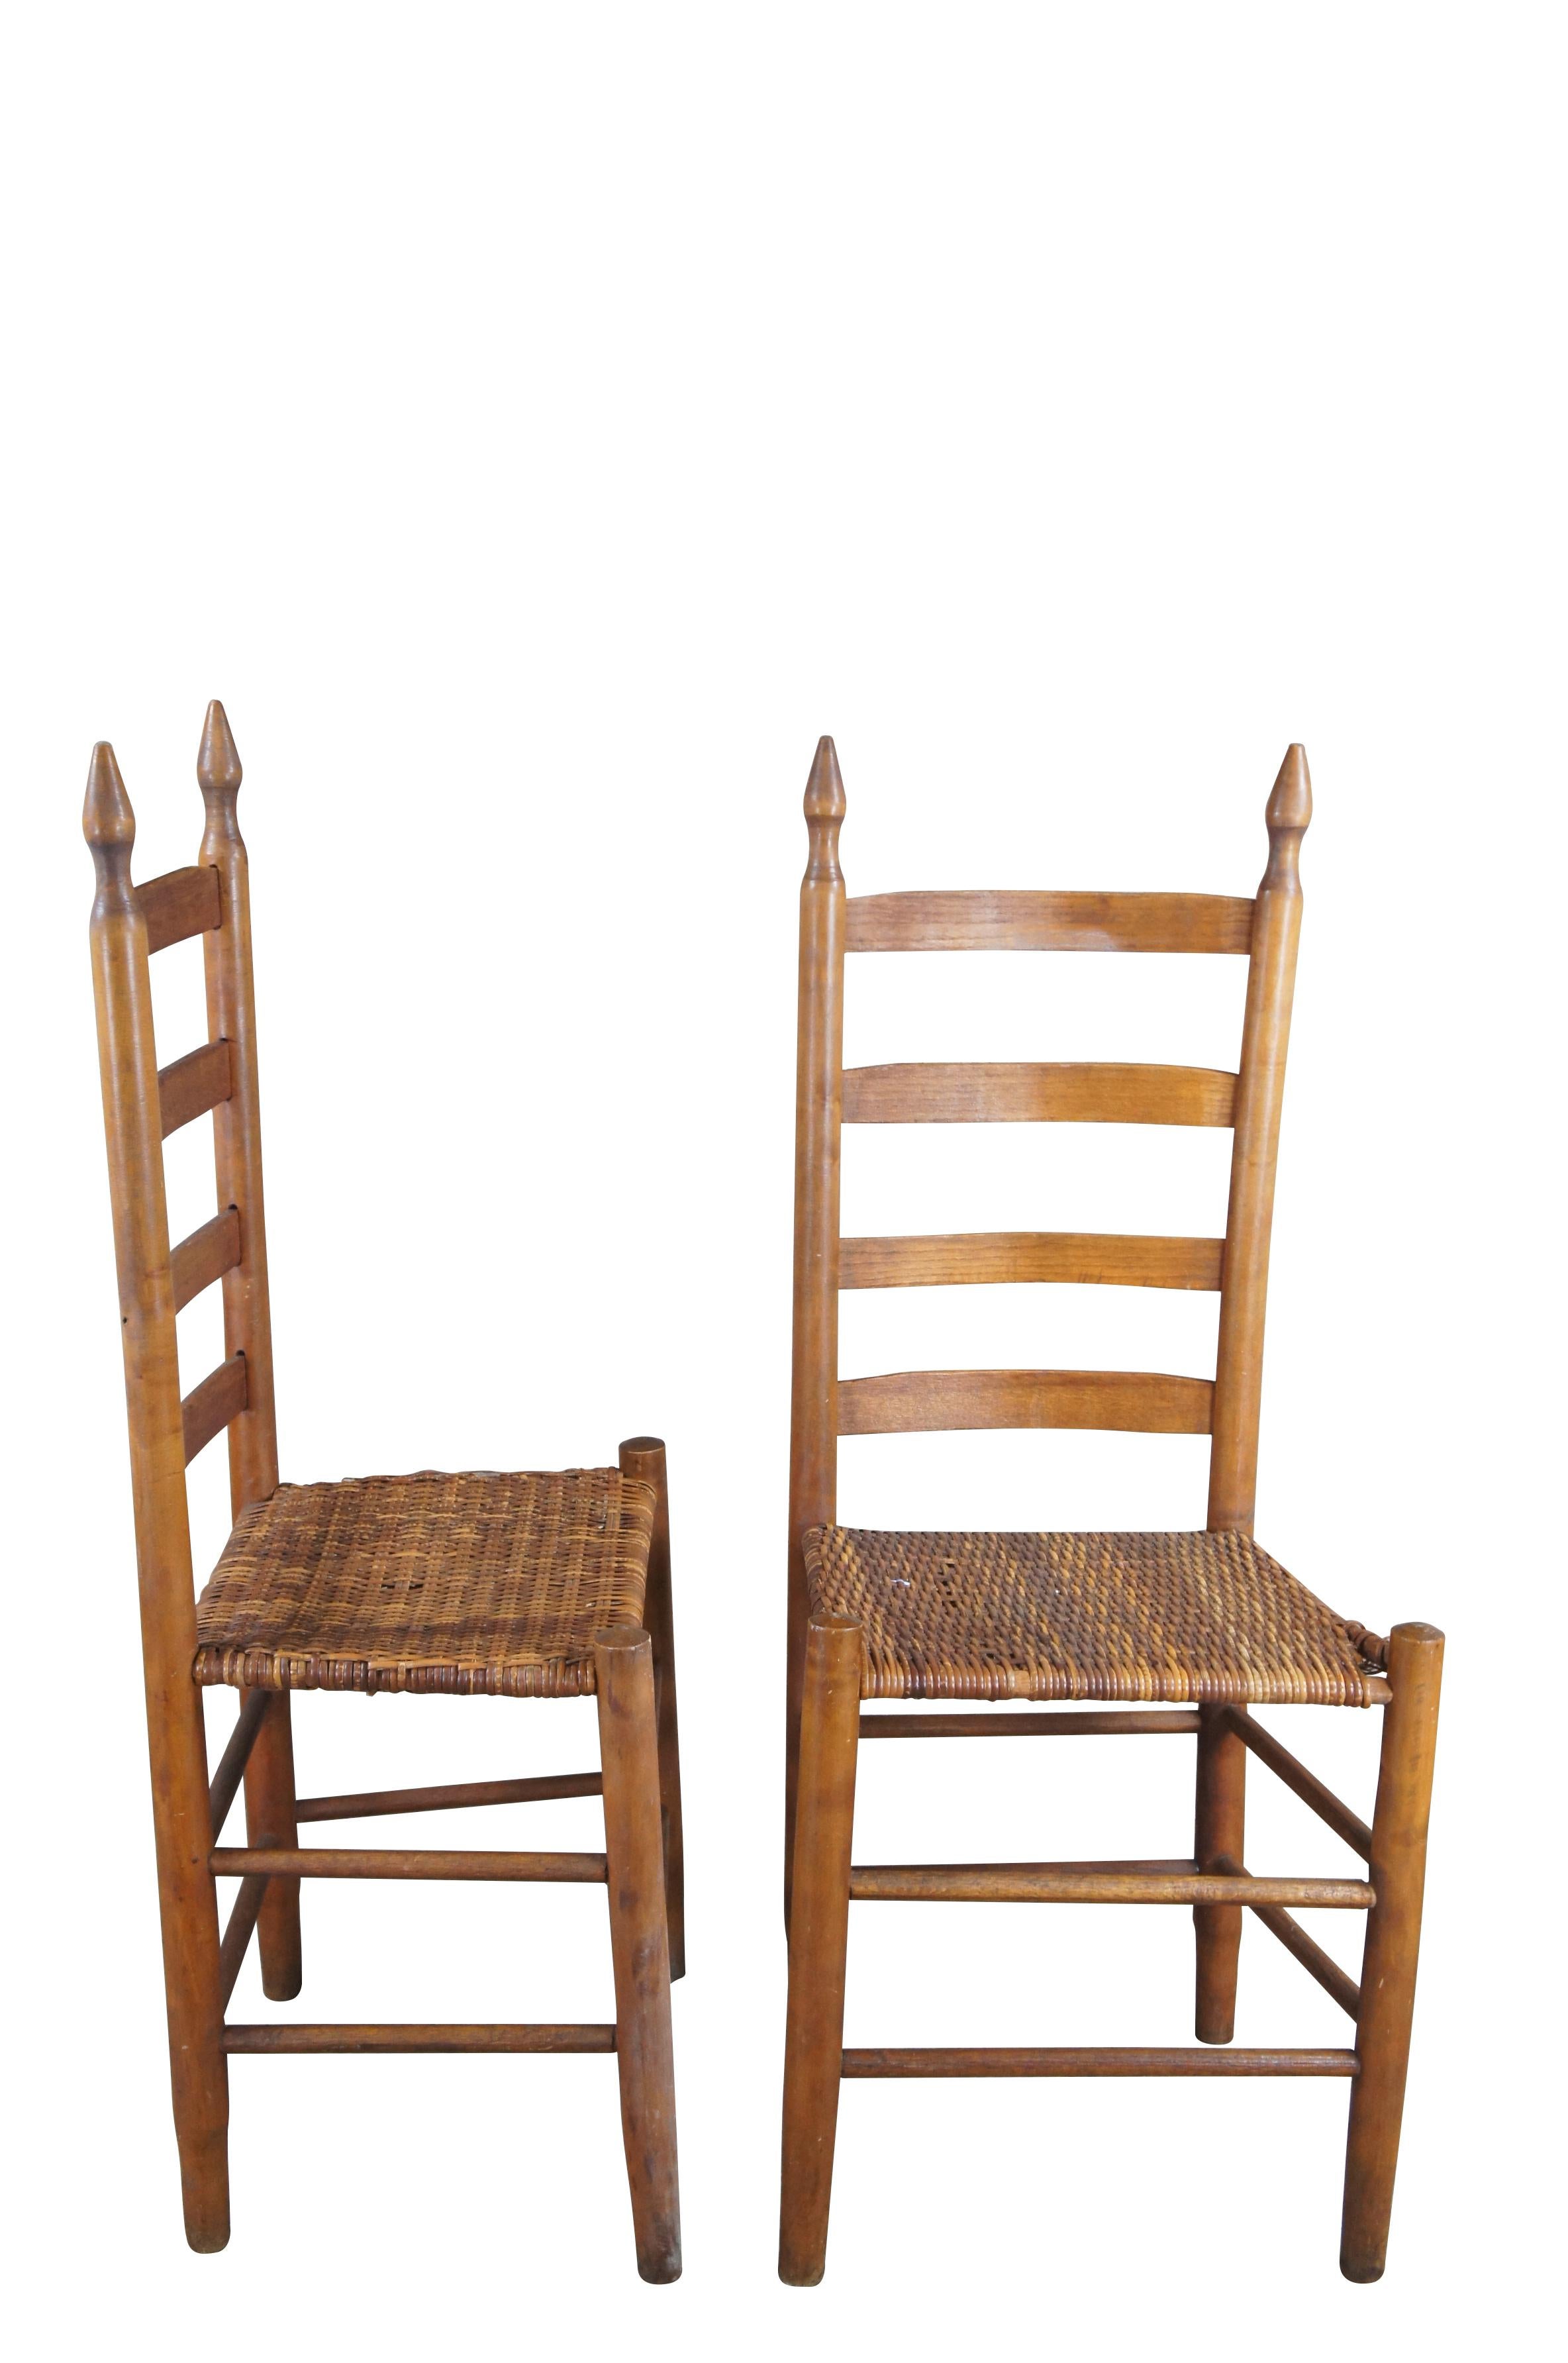 4 American Shaker ladderback dining chairs with rattan / wicker seats.  Beautifully designed with unique cone shaped finials.  

Dimensions:
19.5